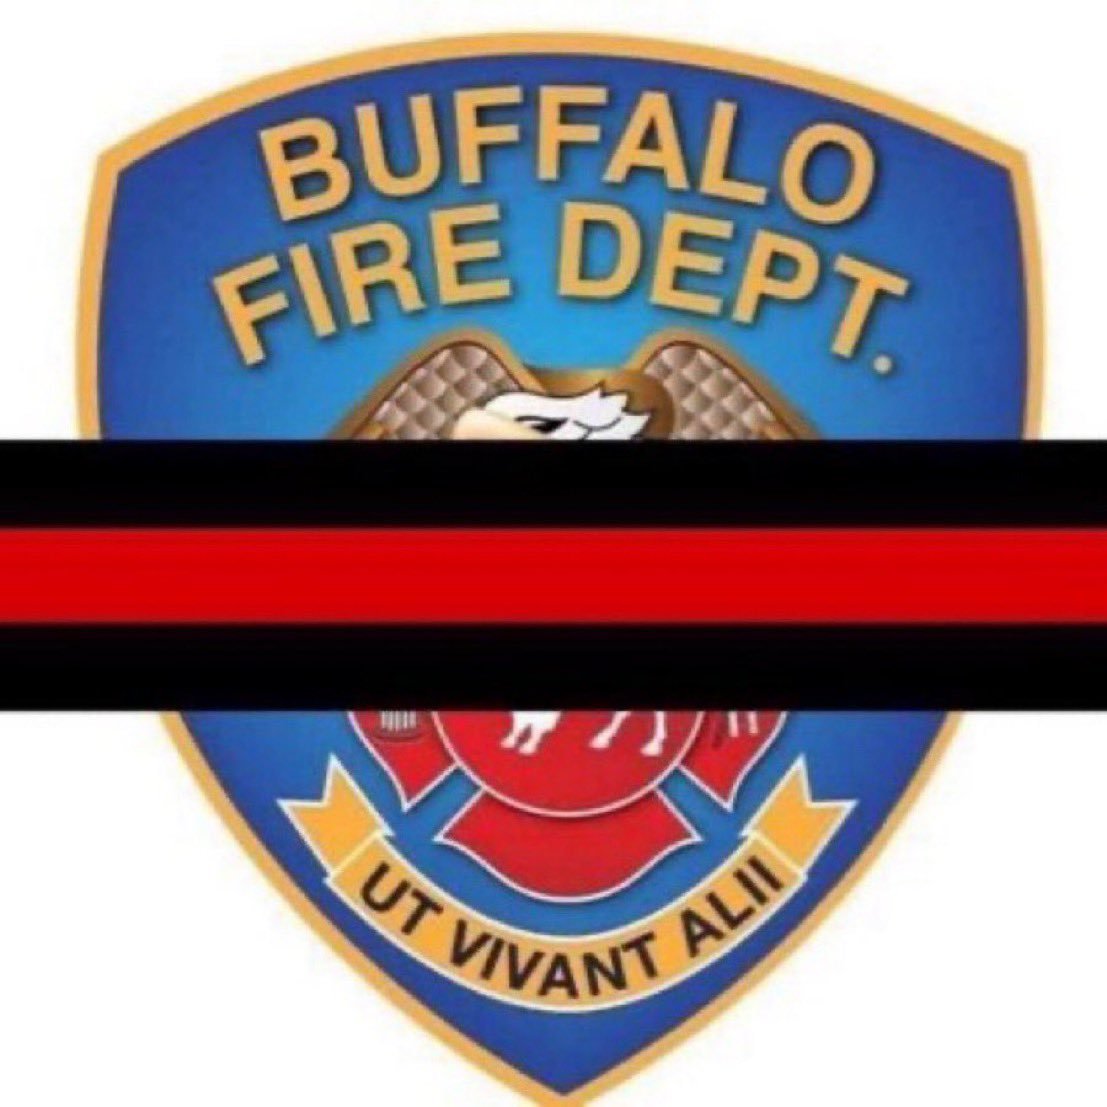 On behalf of Thorold Fire and Emergency Services our thoughts and prayers are with the Buffalo Fire Department. Our sincerest condolences to the families as we mourn with you during this difficult time. @